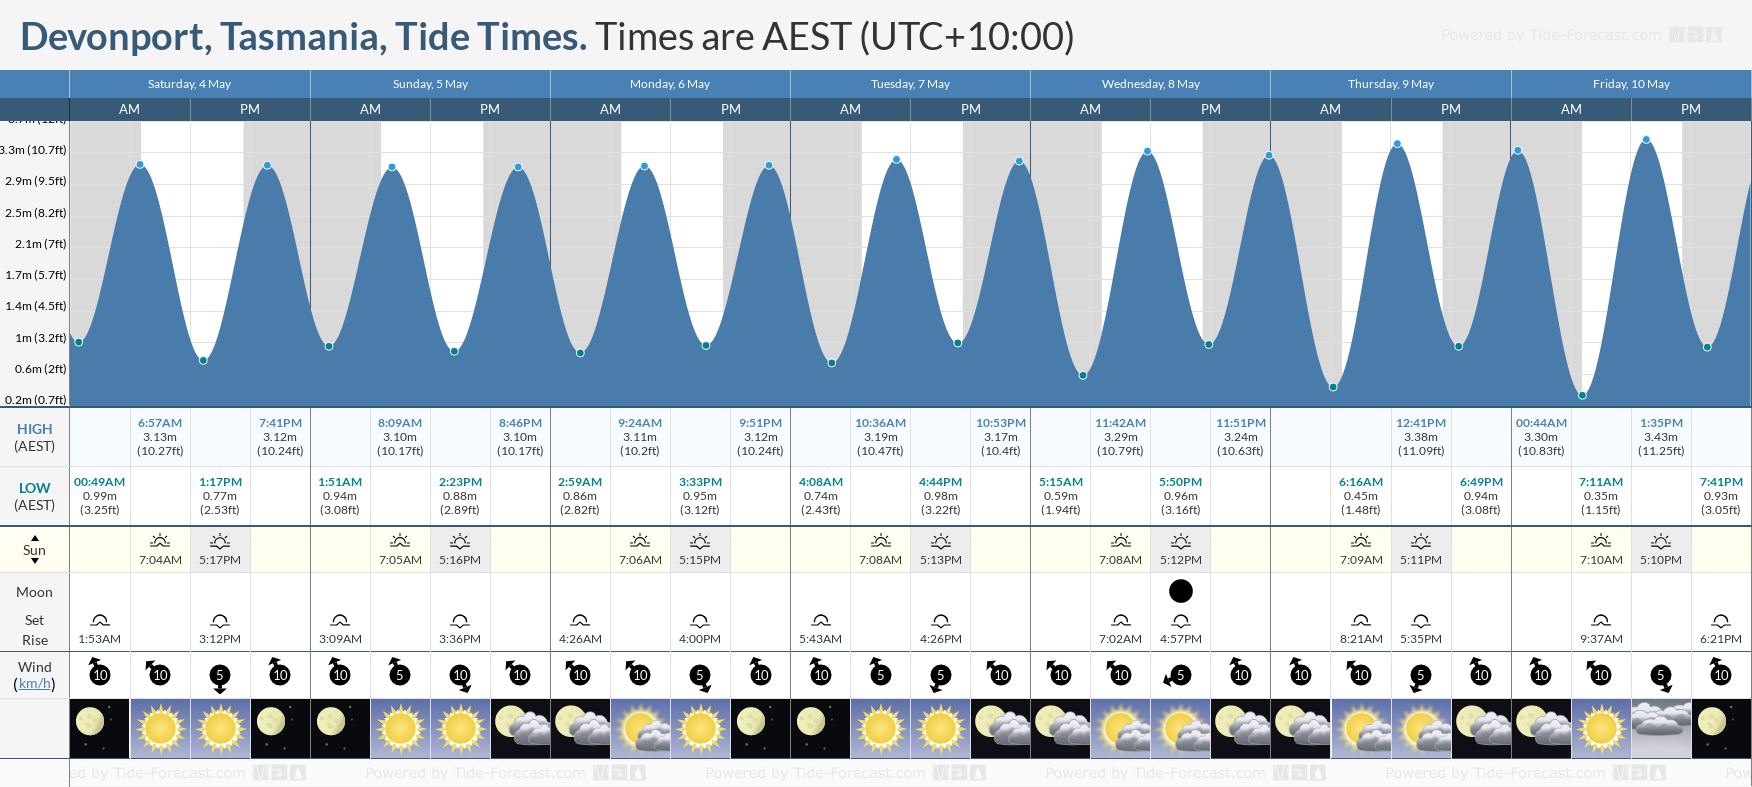 Devonport, Tasmania Tide Chart including high and low tide tide times for the next 7 days